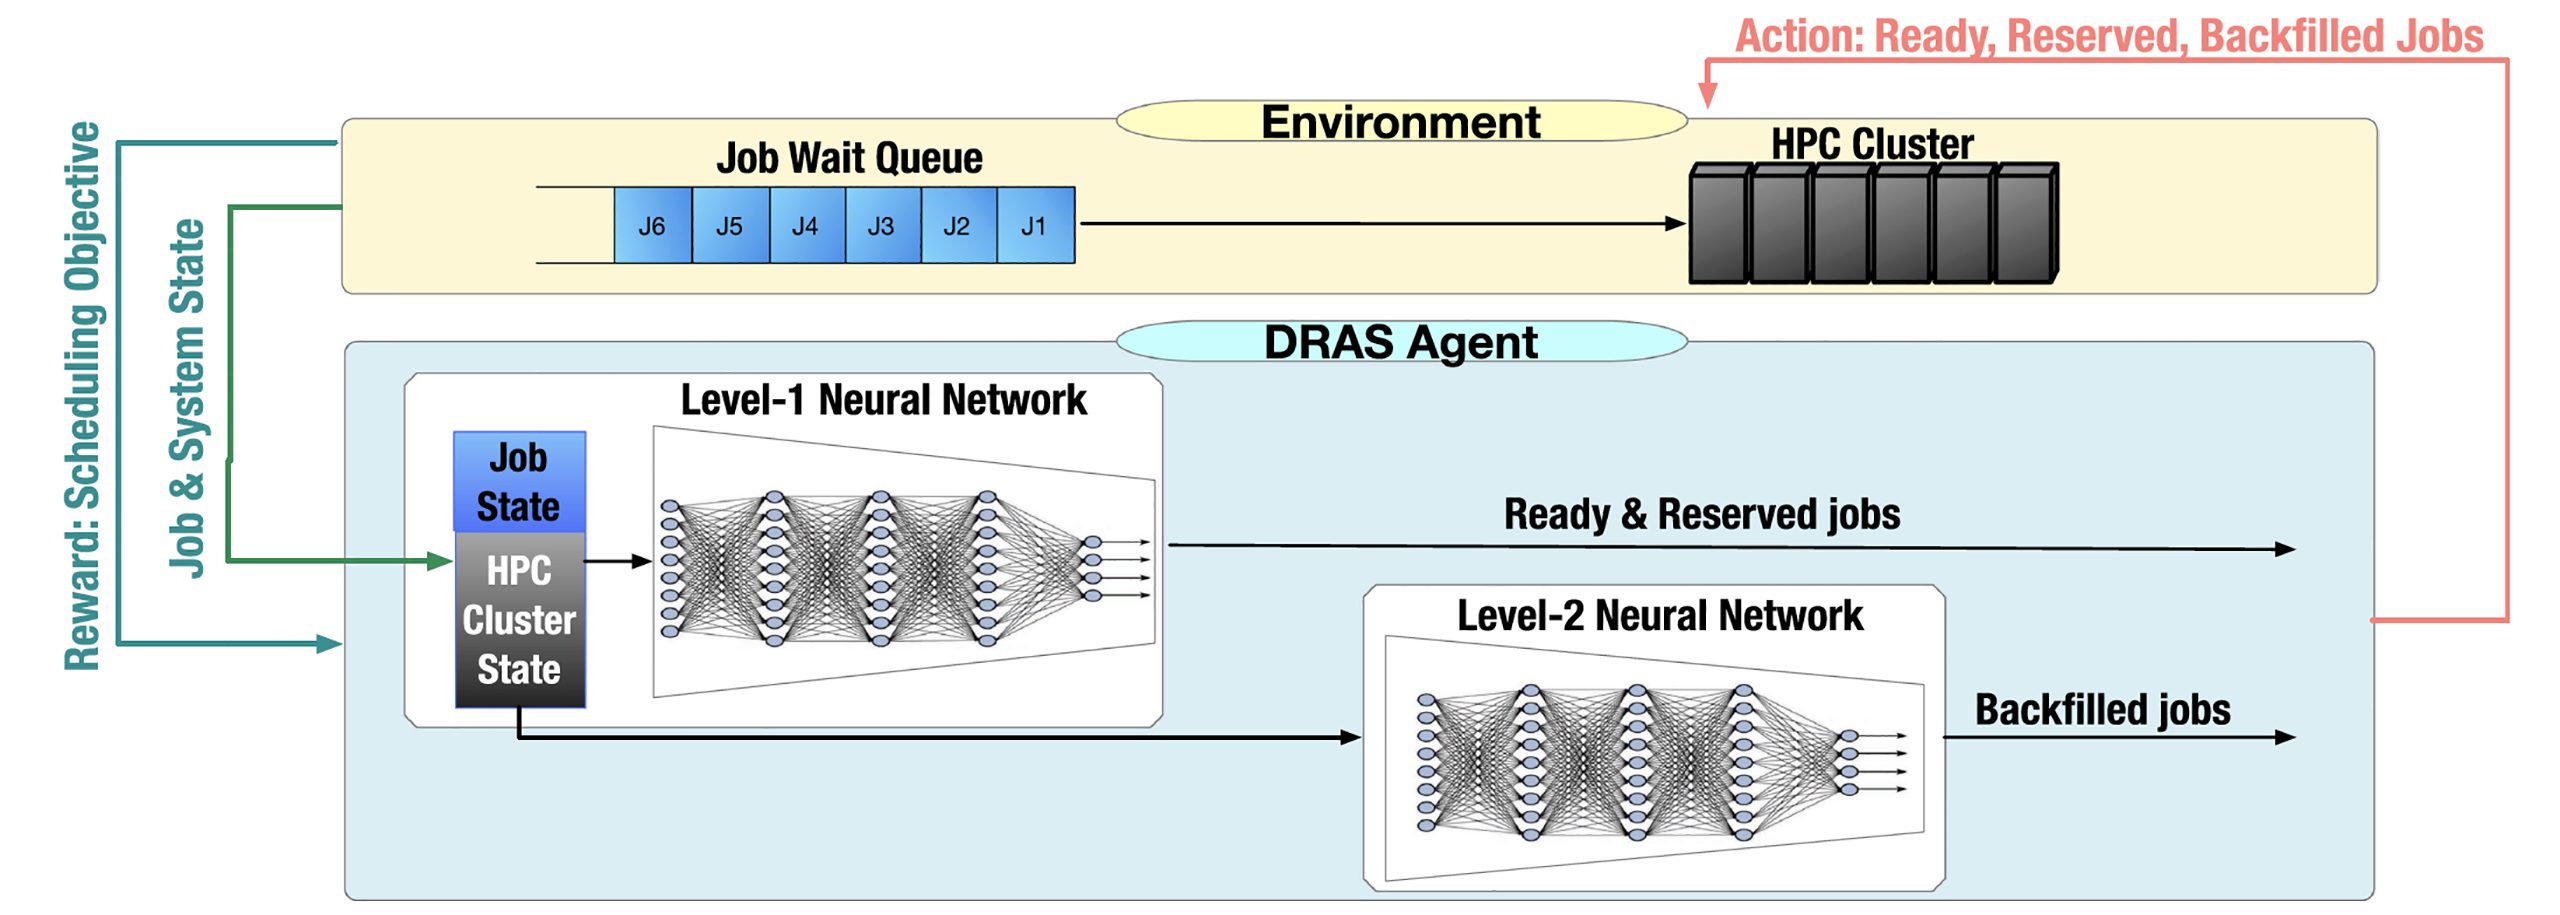 DRAS overview. DRAS agent (at the bottom) represents the scheduling agent; the environment (at the top) comprises the rest of the system, including job wait queue and HPC cluster.